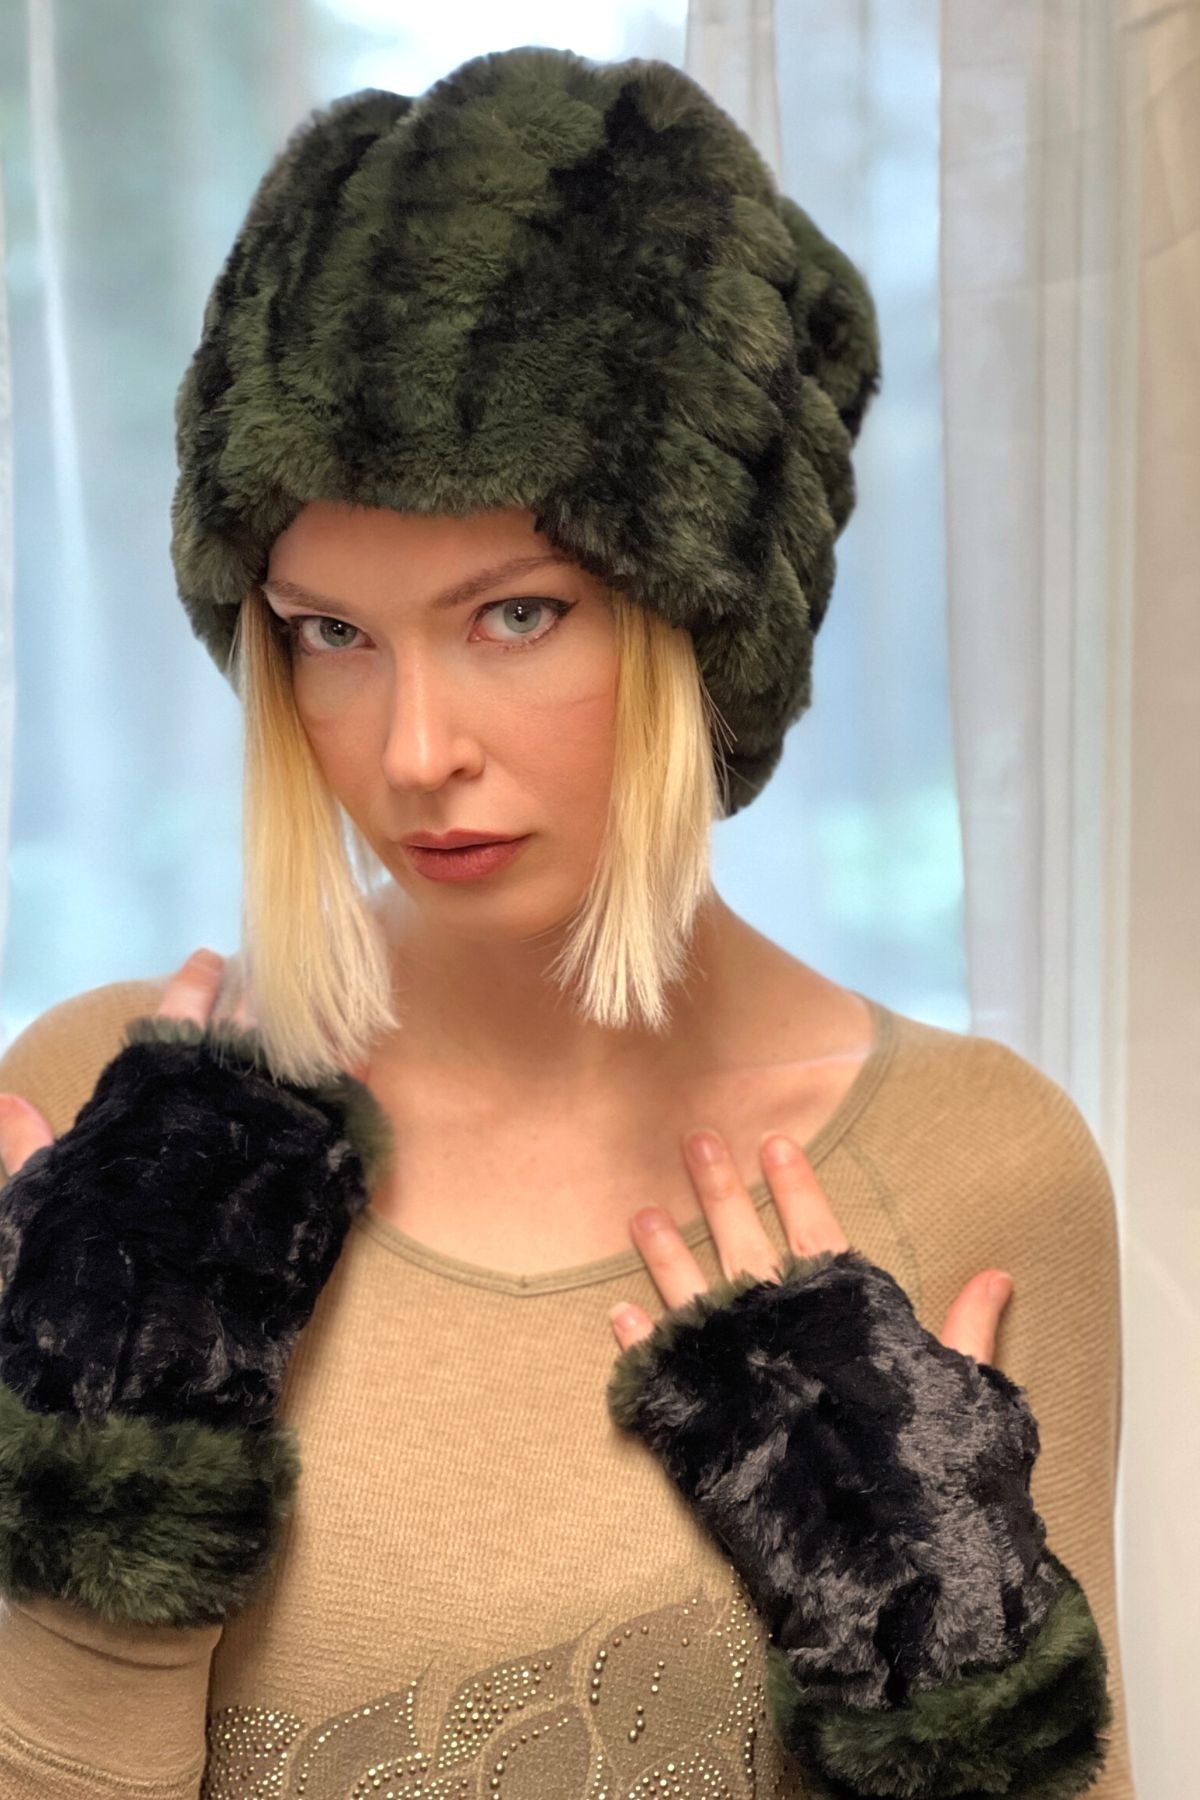 Model wearing Royal Opulence Fingerless Gloves Mid in Black Pine Faux Fur  with matching Beanie hat by Pandemonium Seattle.